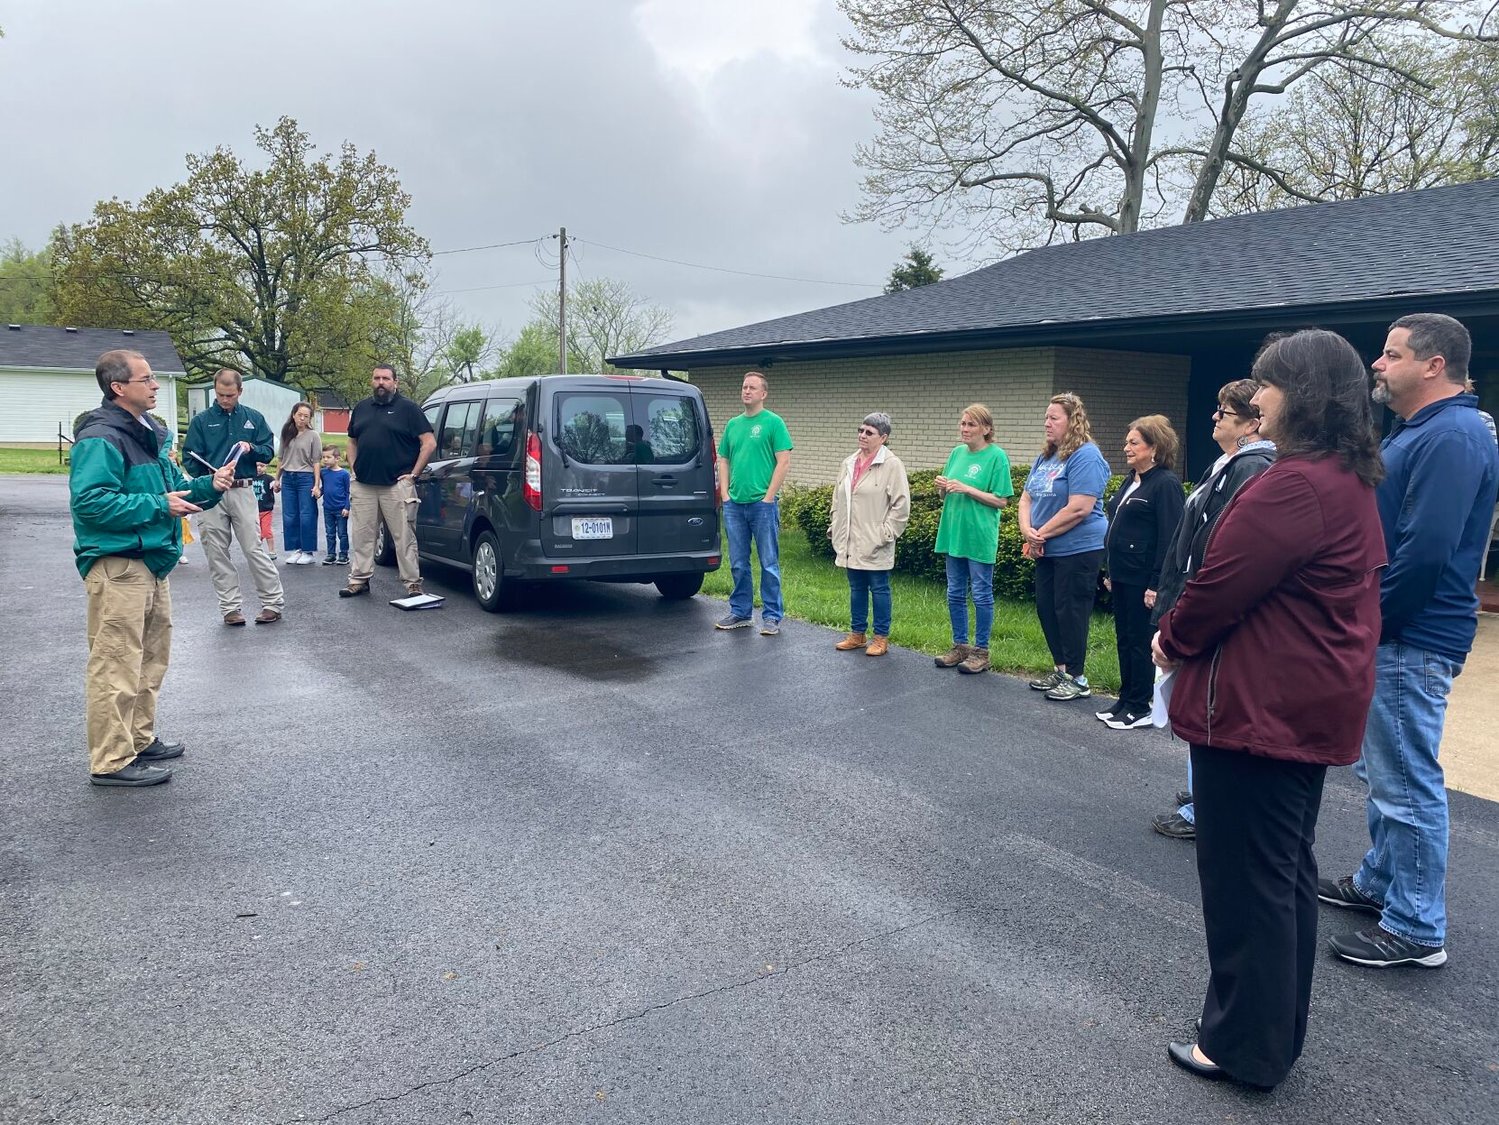 Several made their way out on a murky Missouri day to celebrate Arbor Day, proclaimed by Mayor McNish as April 29, 2021 in Marshfield. 